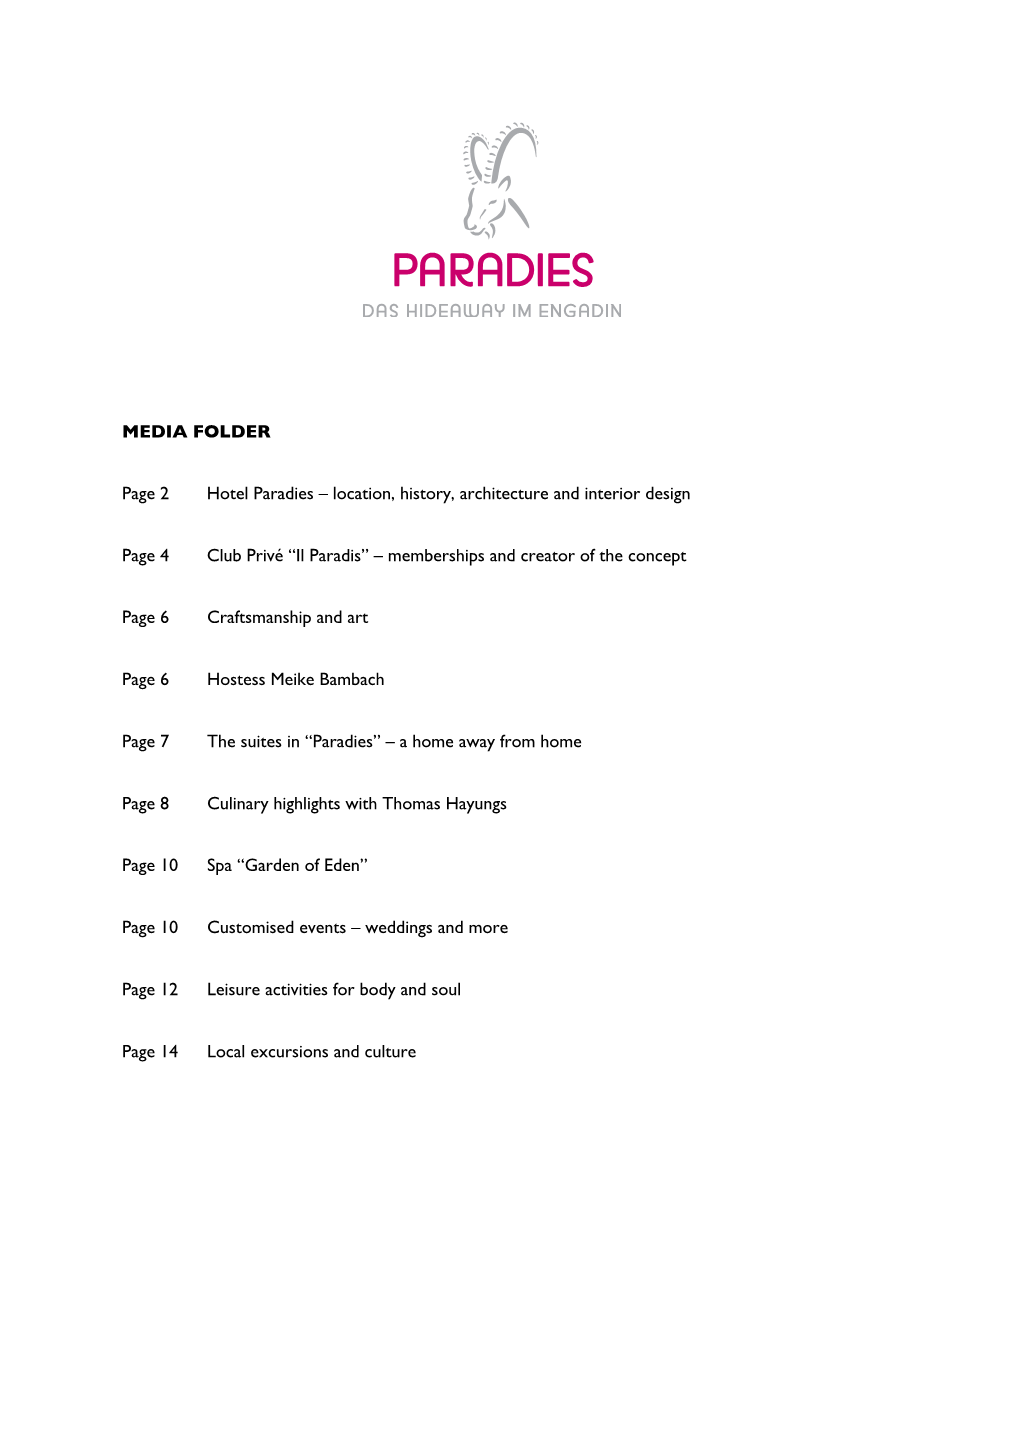 Il Paradis” – Memberships and Creator of the Concept